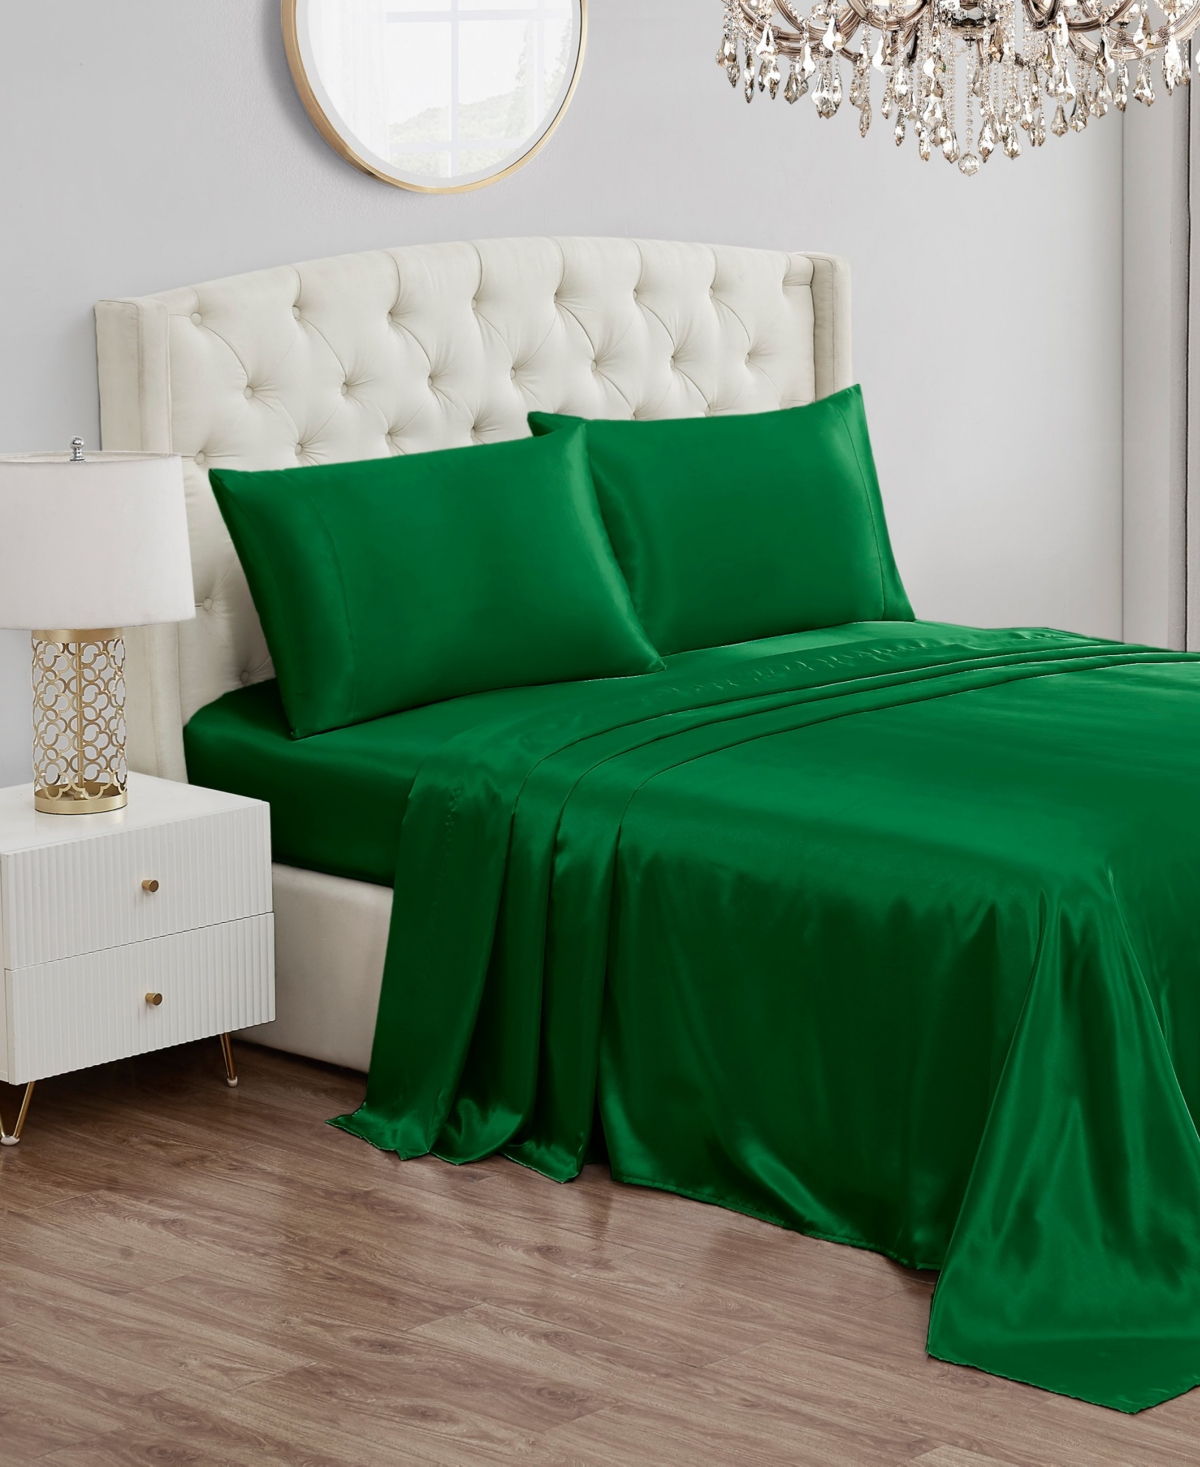 Juicy Couture Satin 3 Piece Sheet Set, Twin In Green